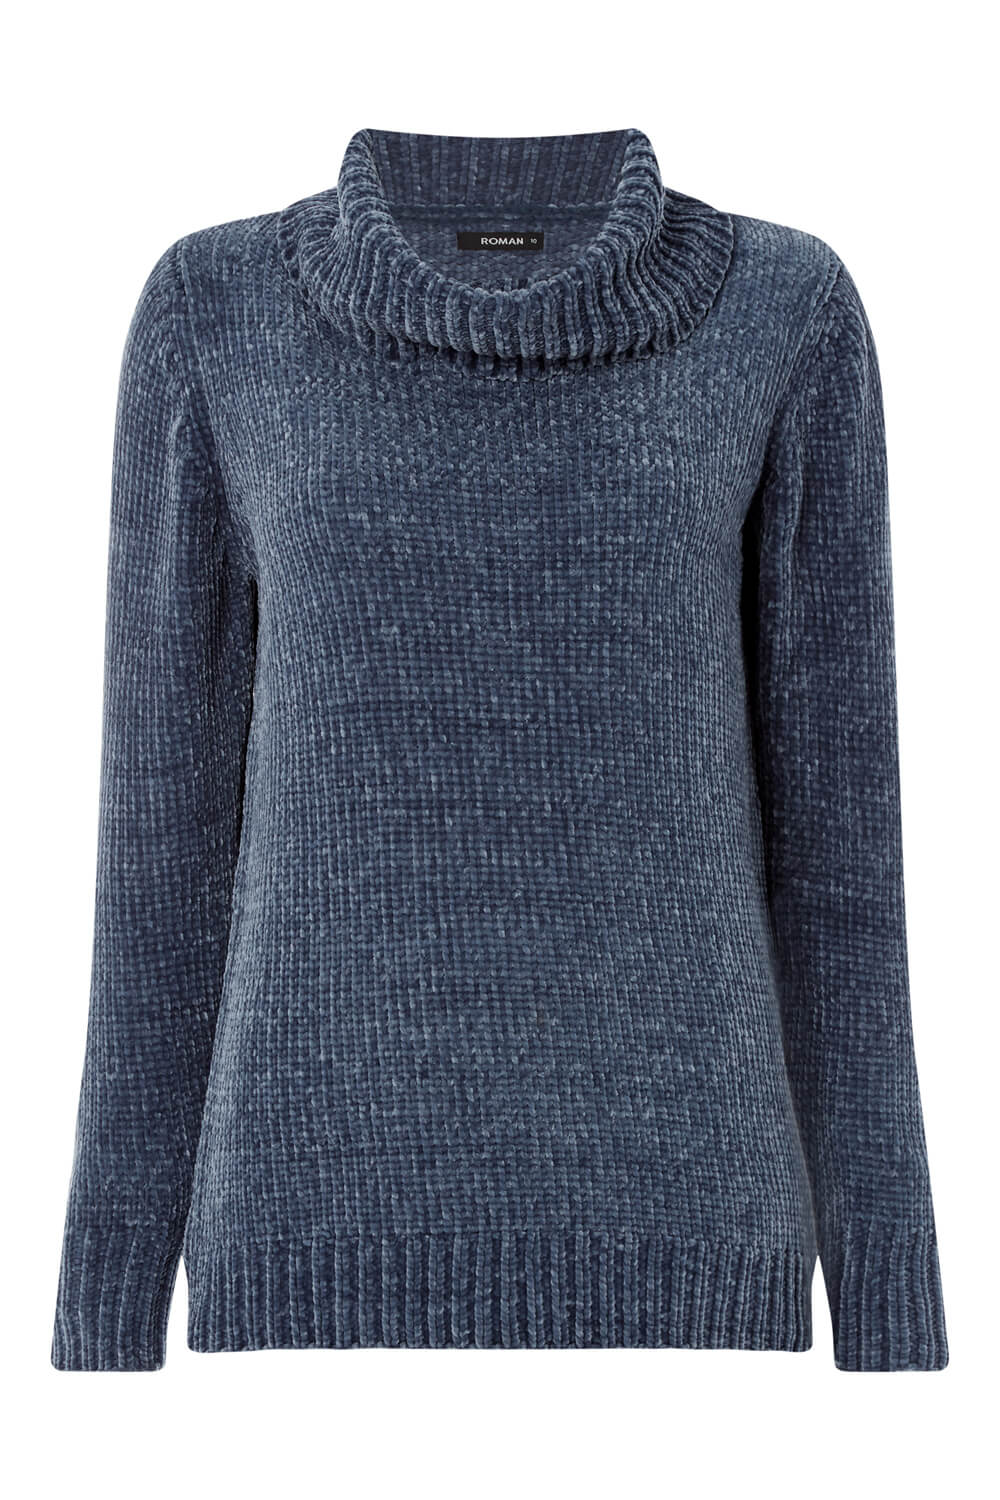 Blue Chenille Cowl Neck Jumper, Image 4 of 4